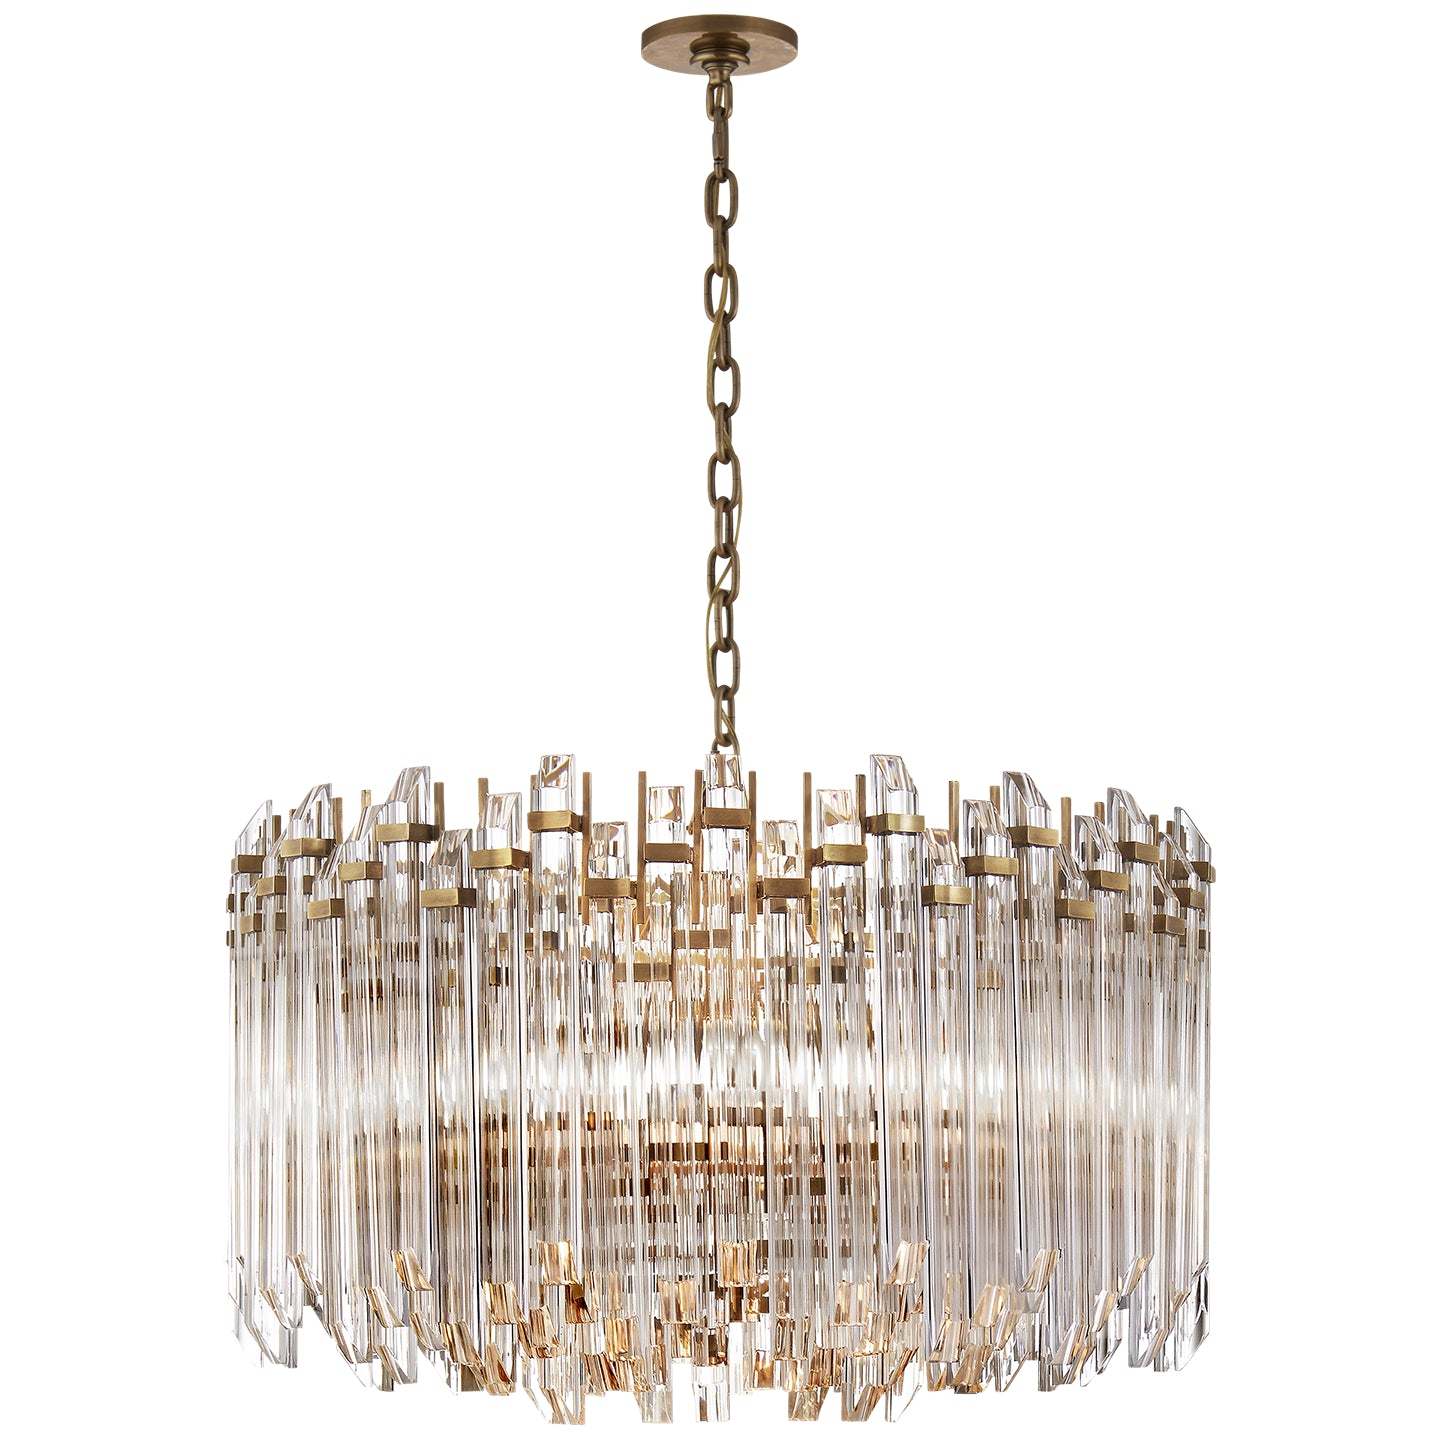 Visual Comfort Signature Canada - Four Light Chandelier - Adele - Hand-Rubbed Antique Brass with Clear Acrylic- Union Lighting Luminaires Decor